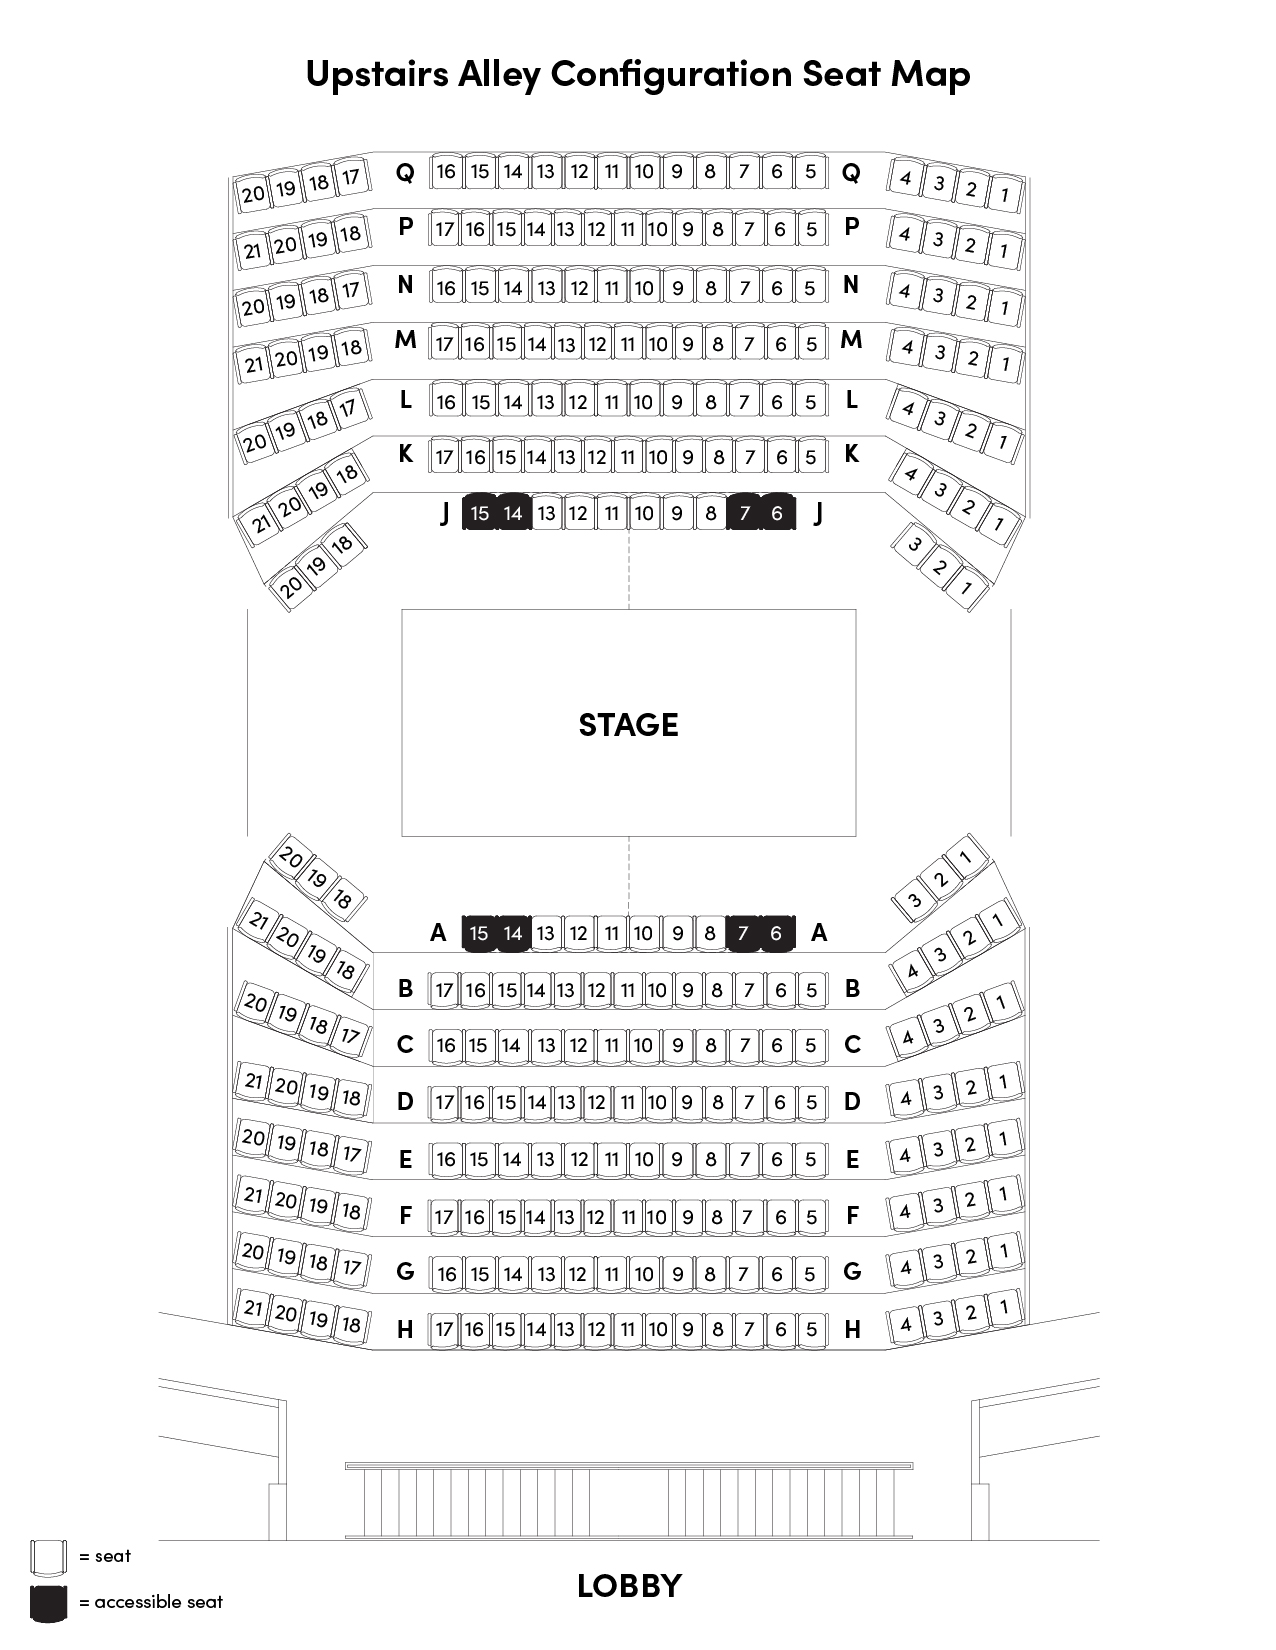 Upstairs Theatre seat map